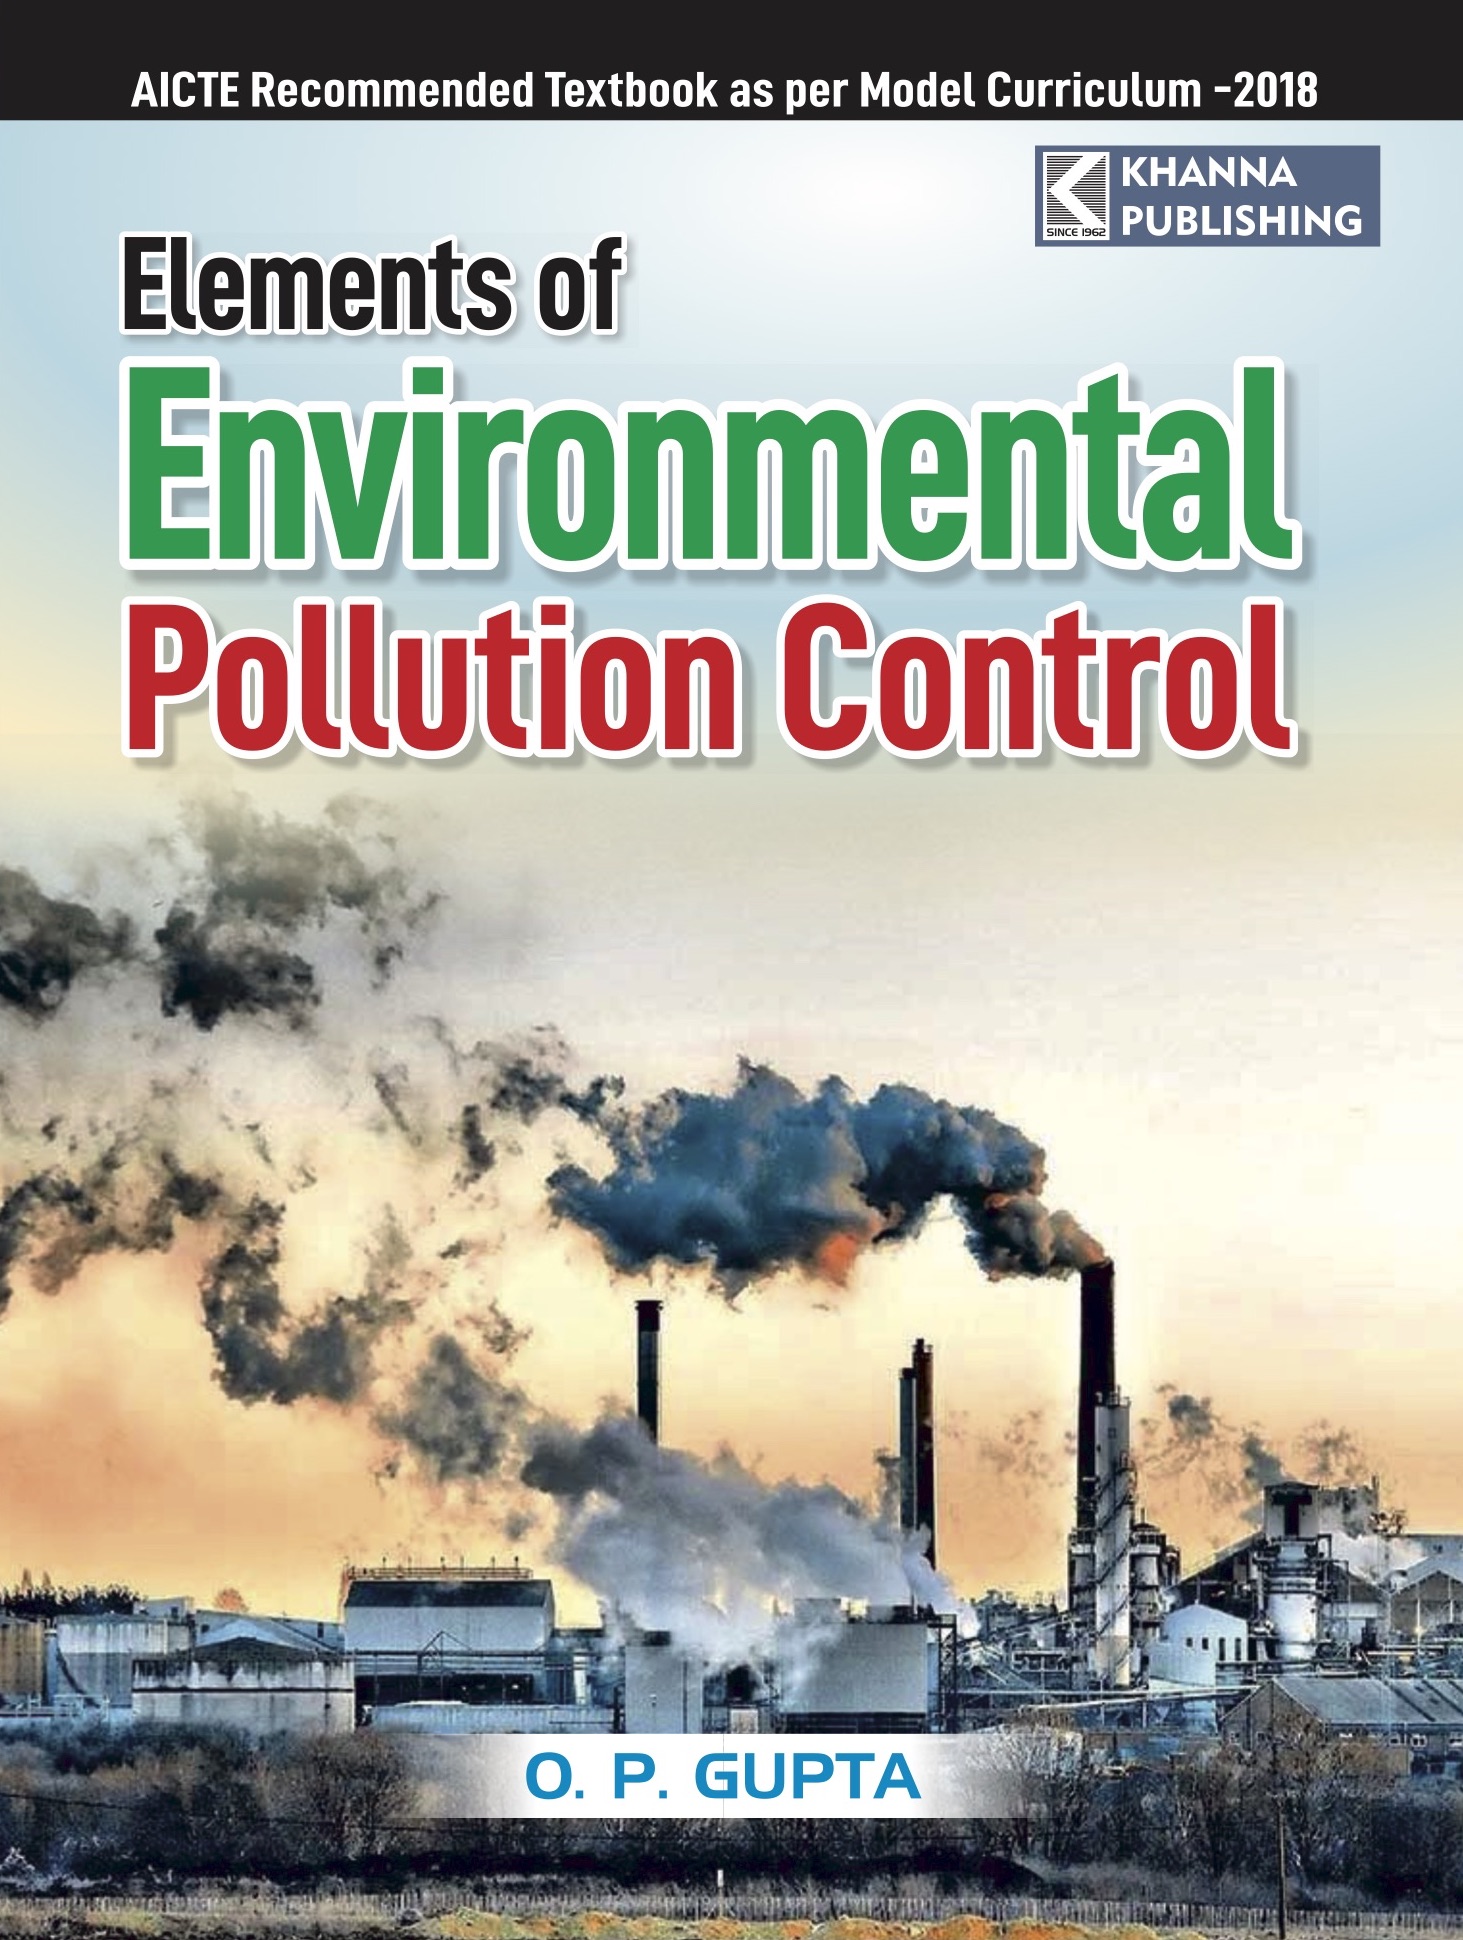 Elements of Environmental Pollution Control